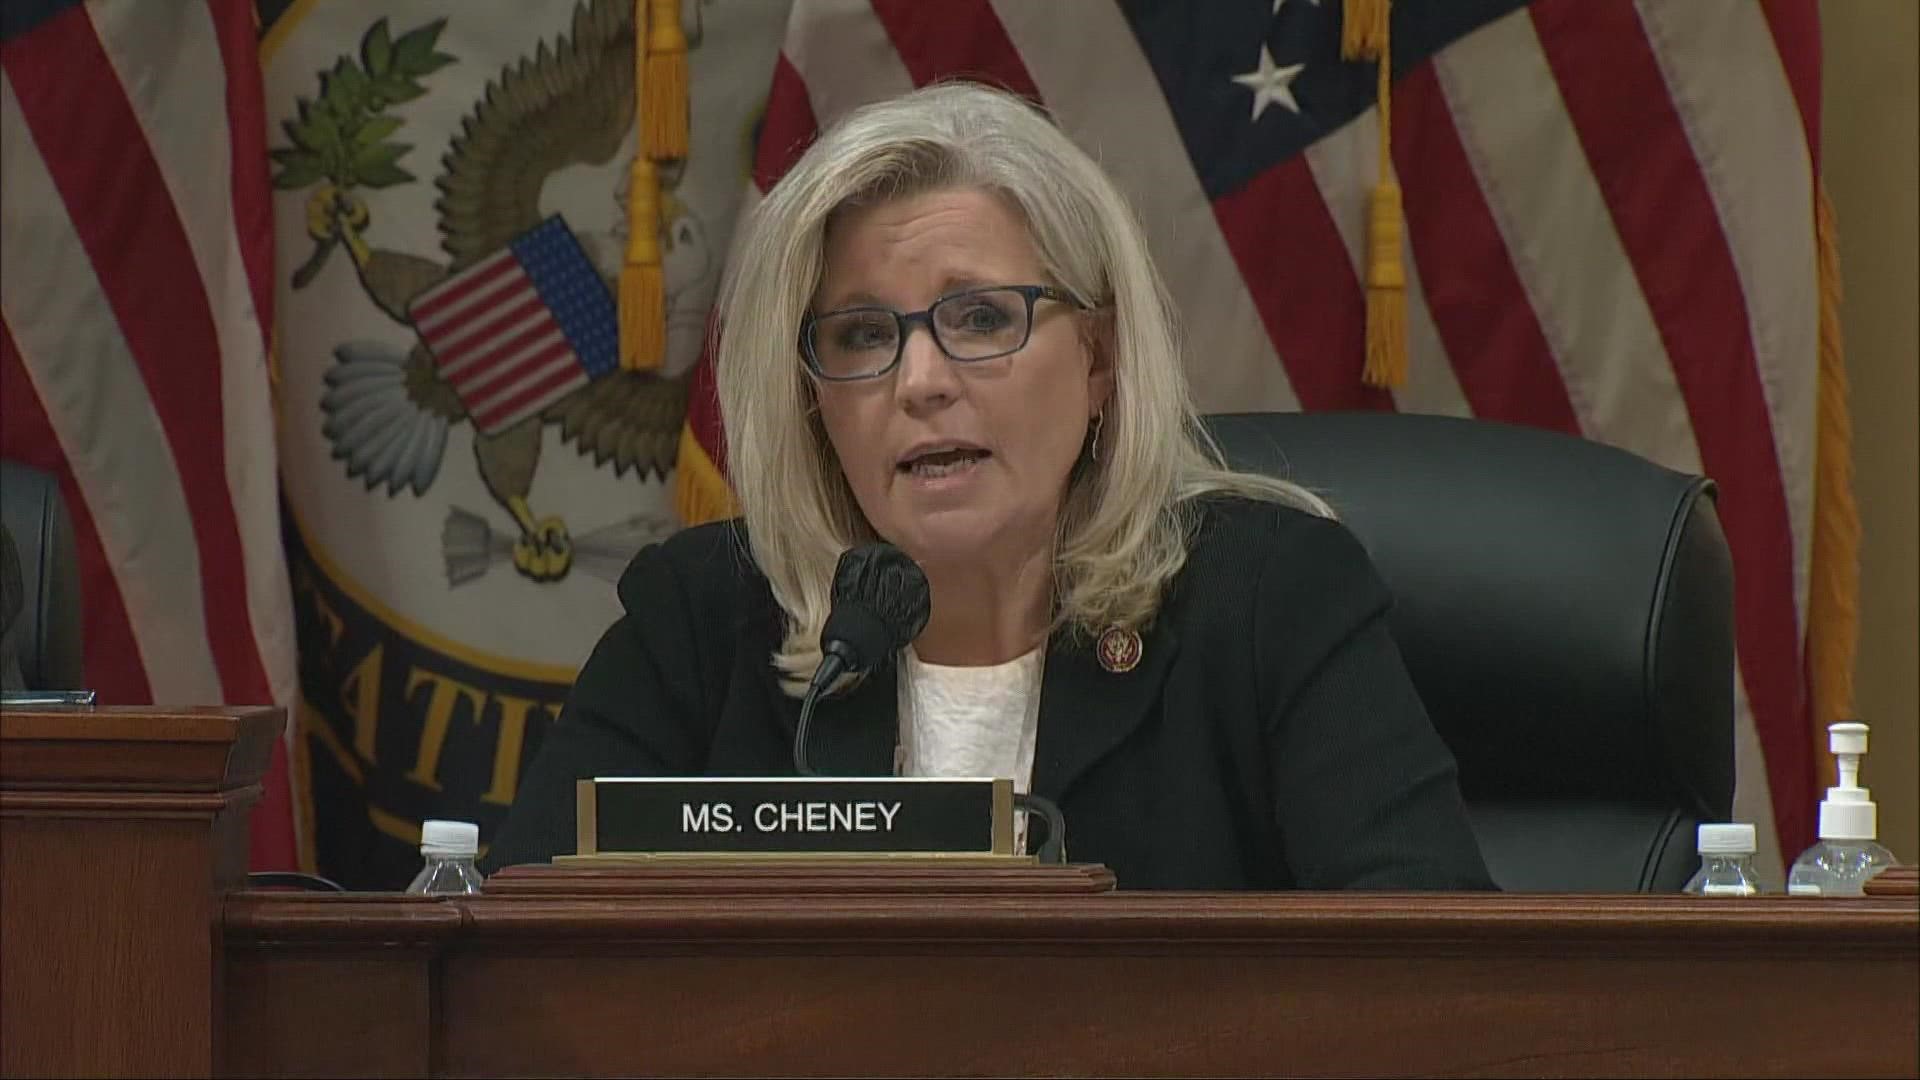 All eyes will be on Wyoming as Liz Cheney faces an uphill battle in her re-election campaign against Harriet Hageman.